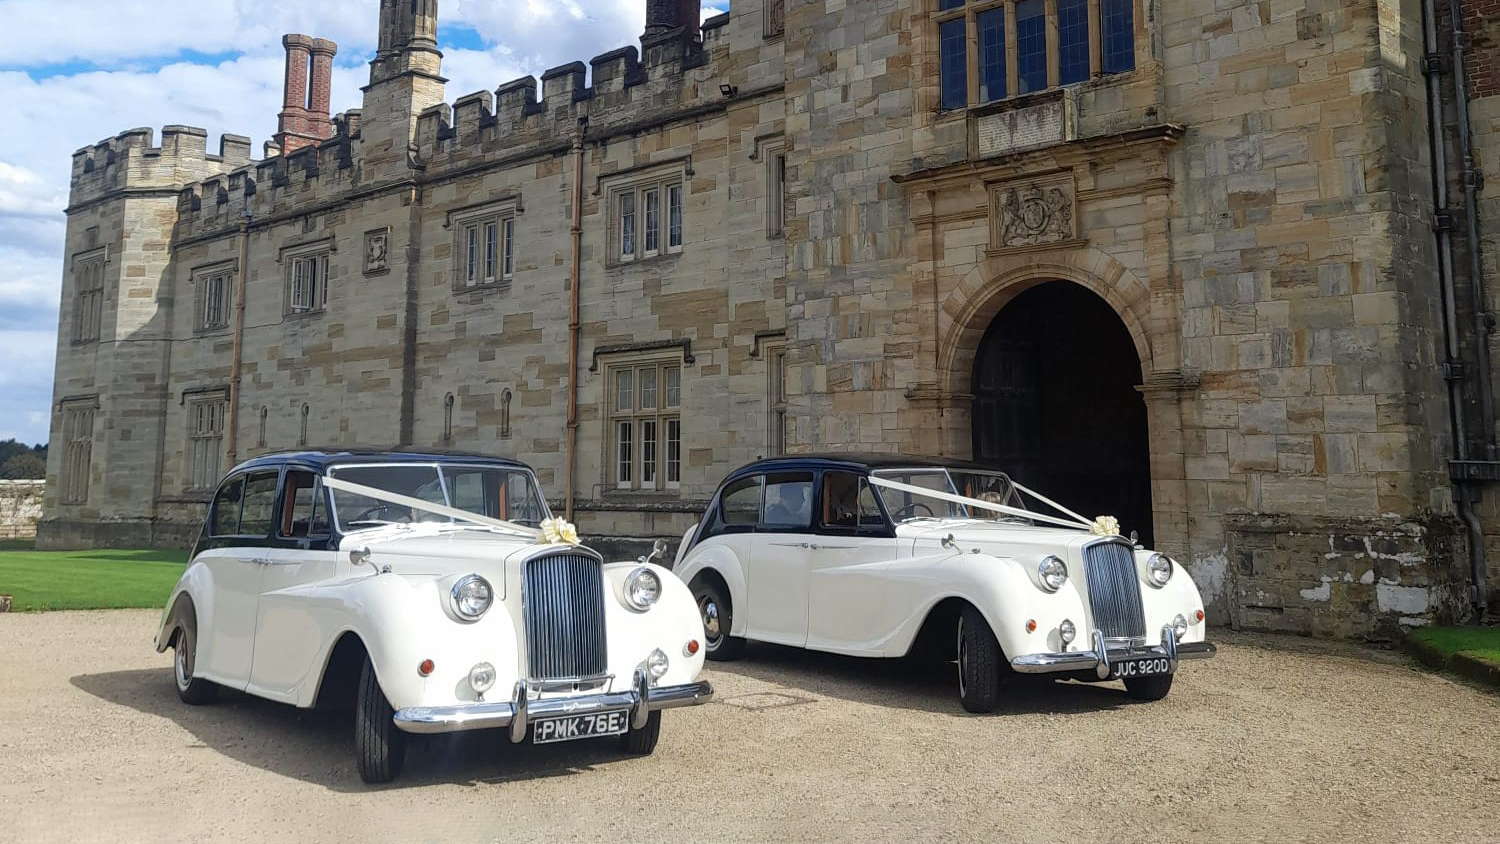 Two Classic Austin Princess Limousine decorated with Ivory Ribbons and Bows on top of the front grill. Vehicles are parked in front of a large manor house in Tonbridge